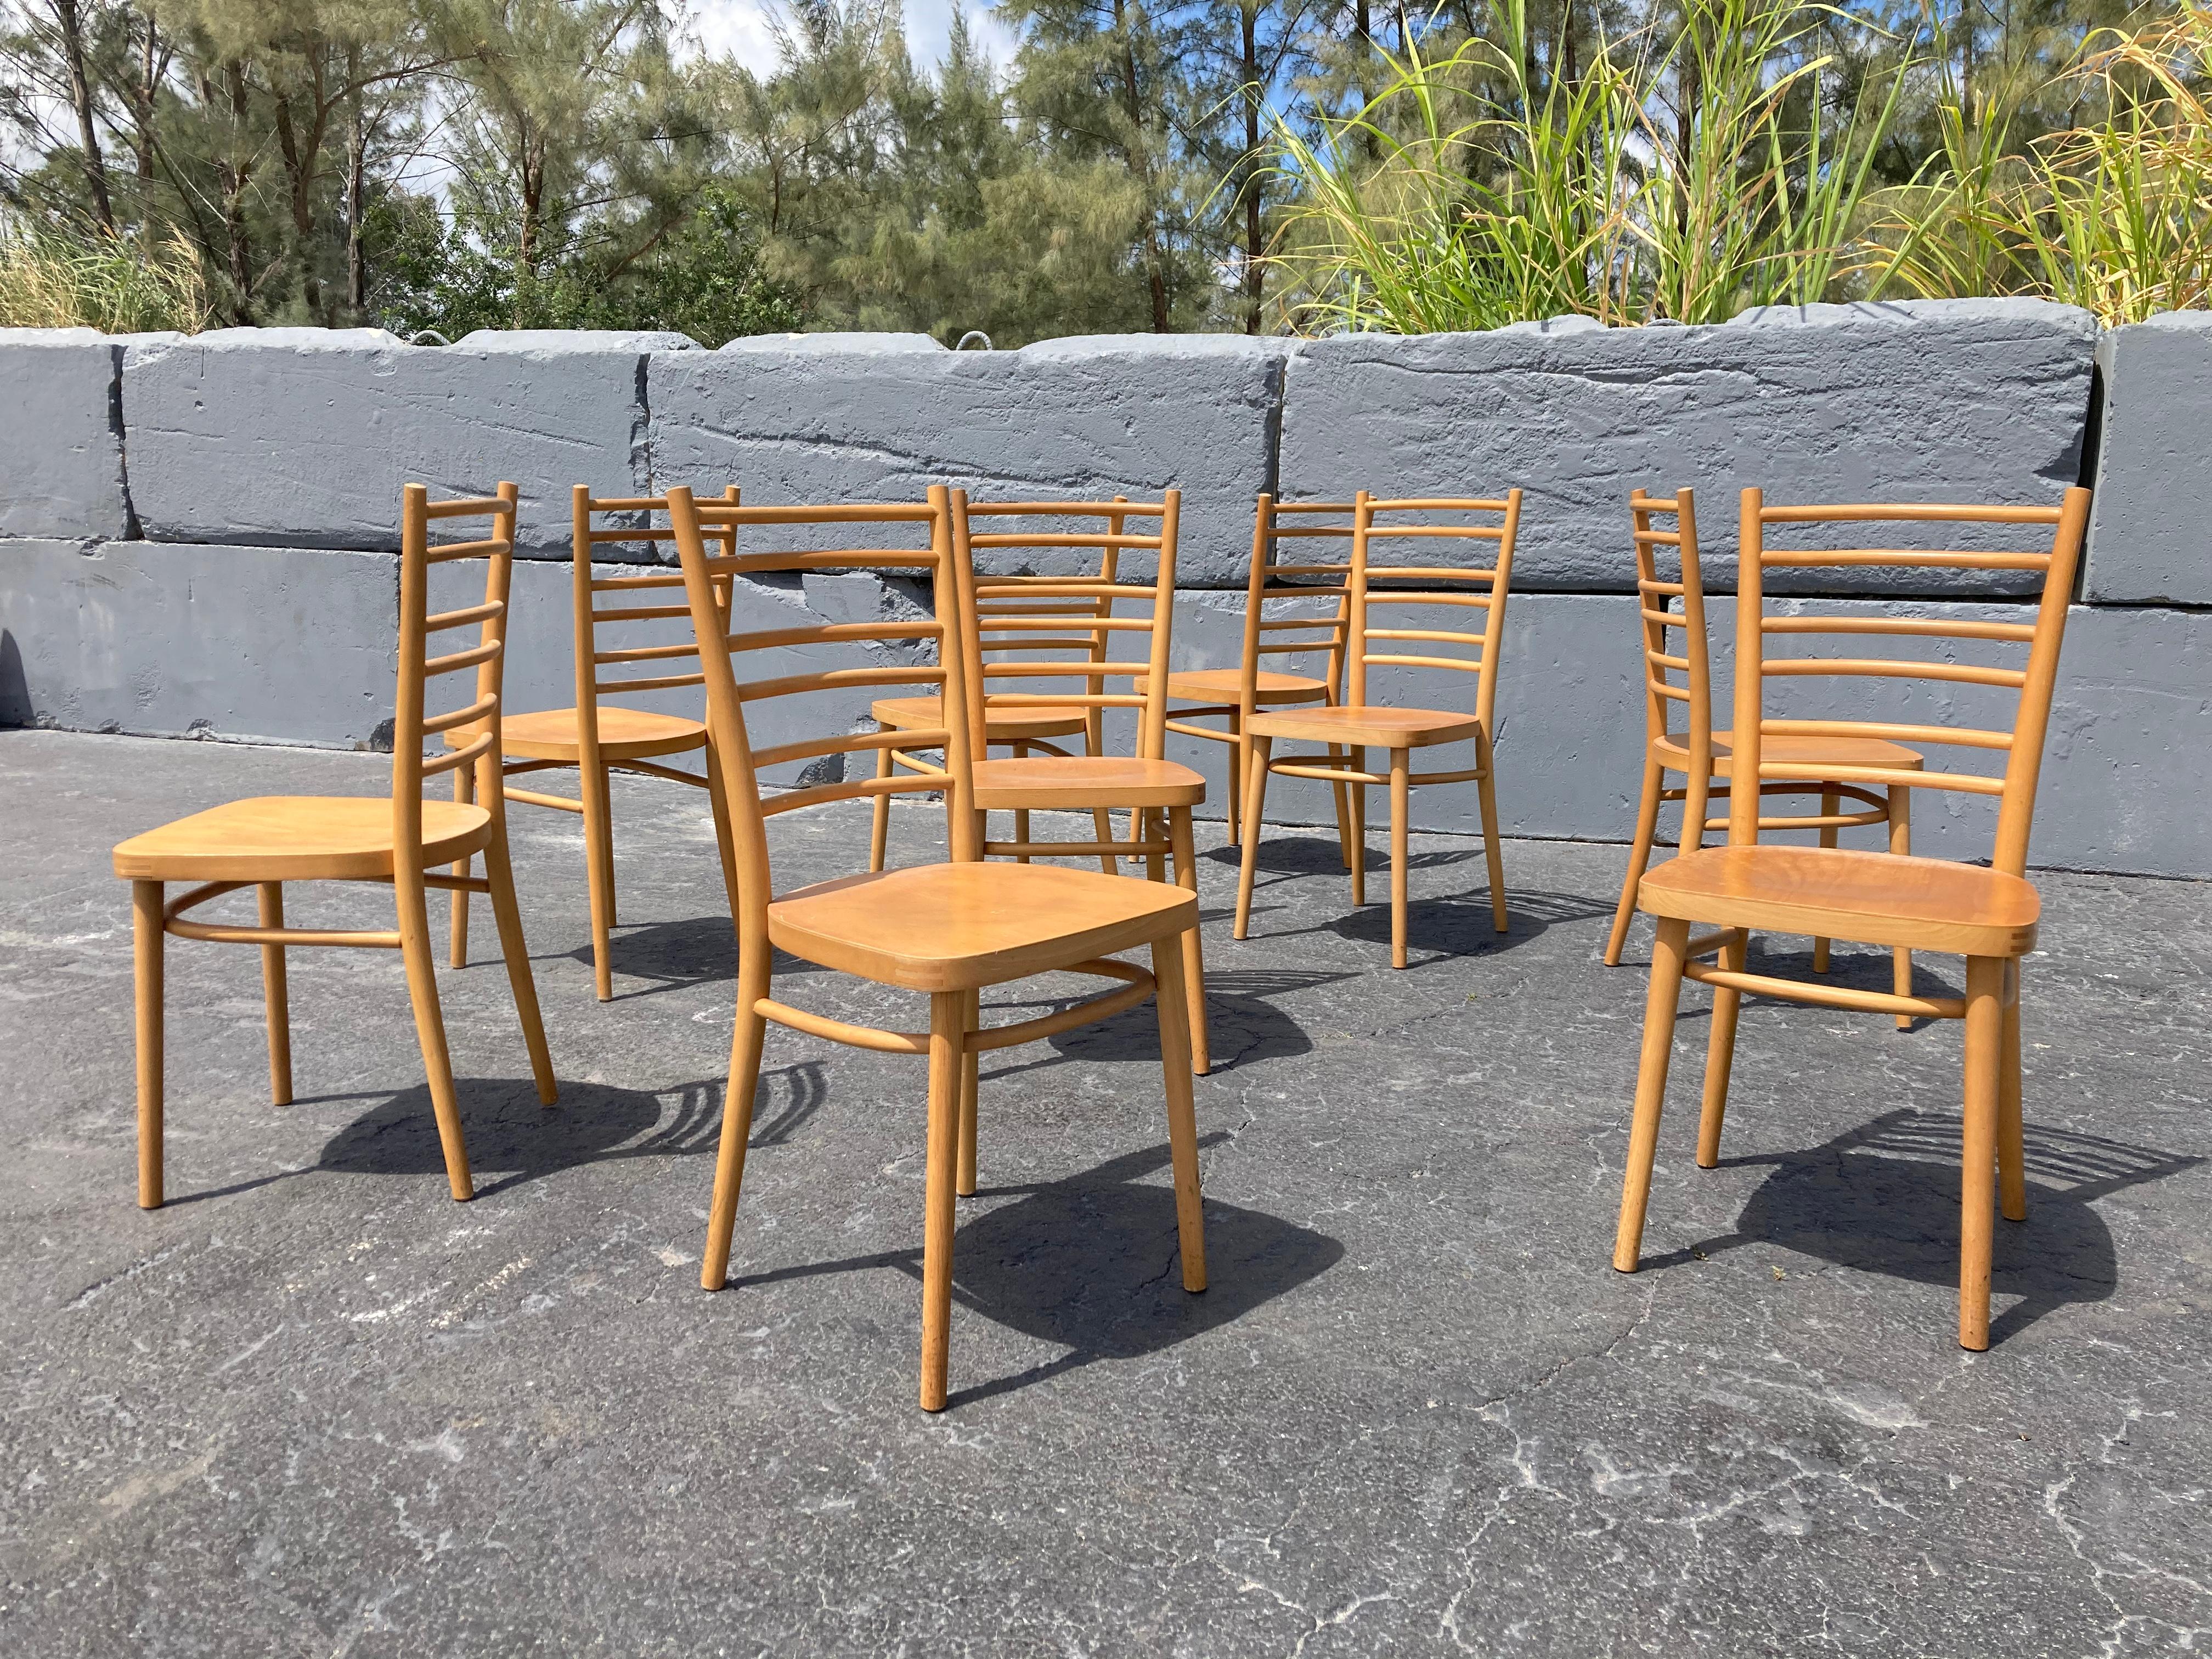 9 beautiful European bentwood dining chairs. Ready for a new home.